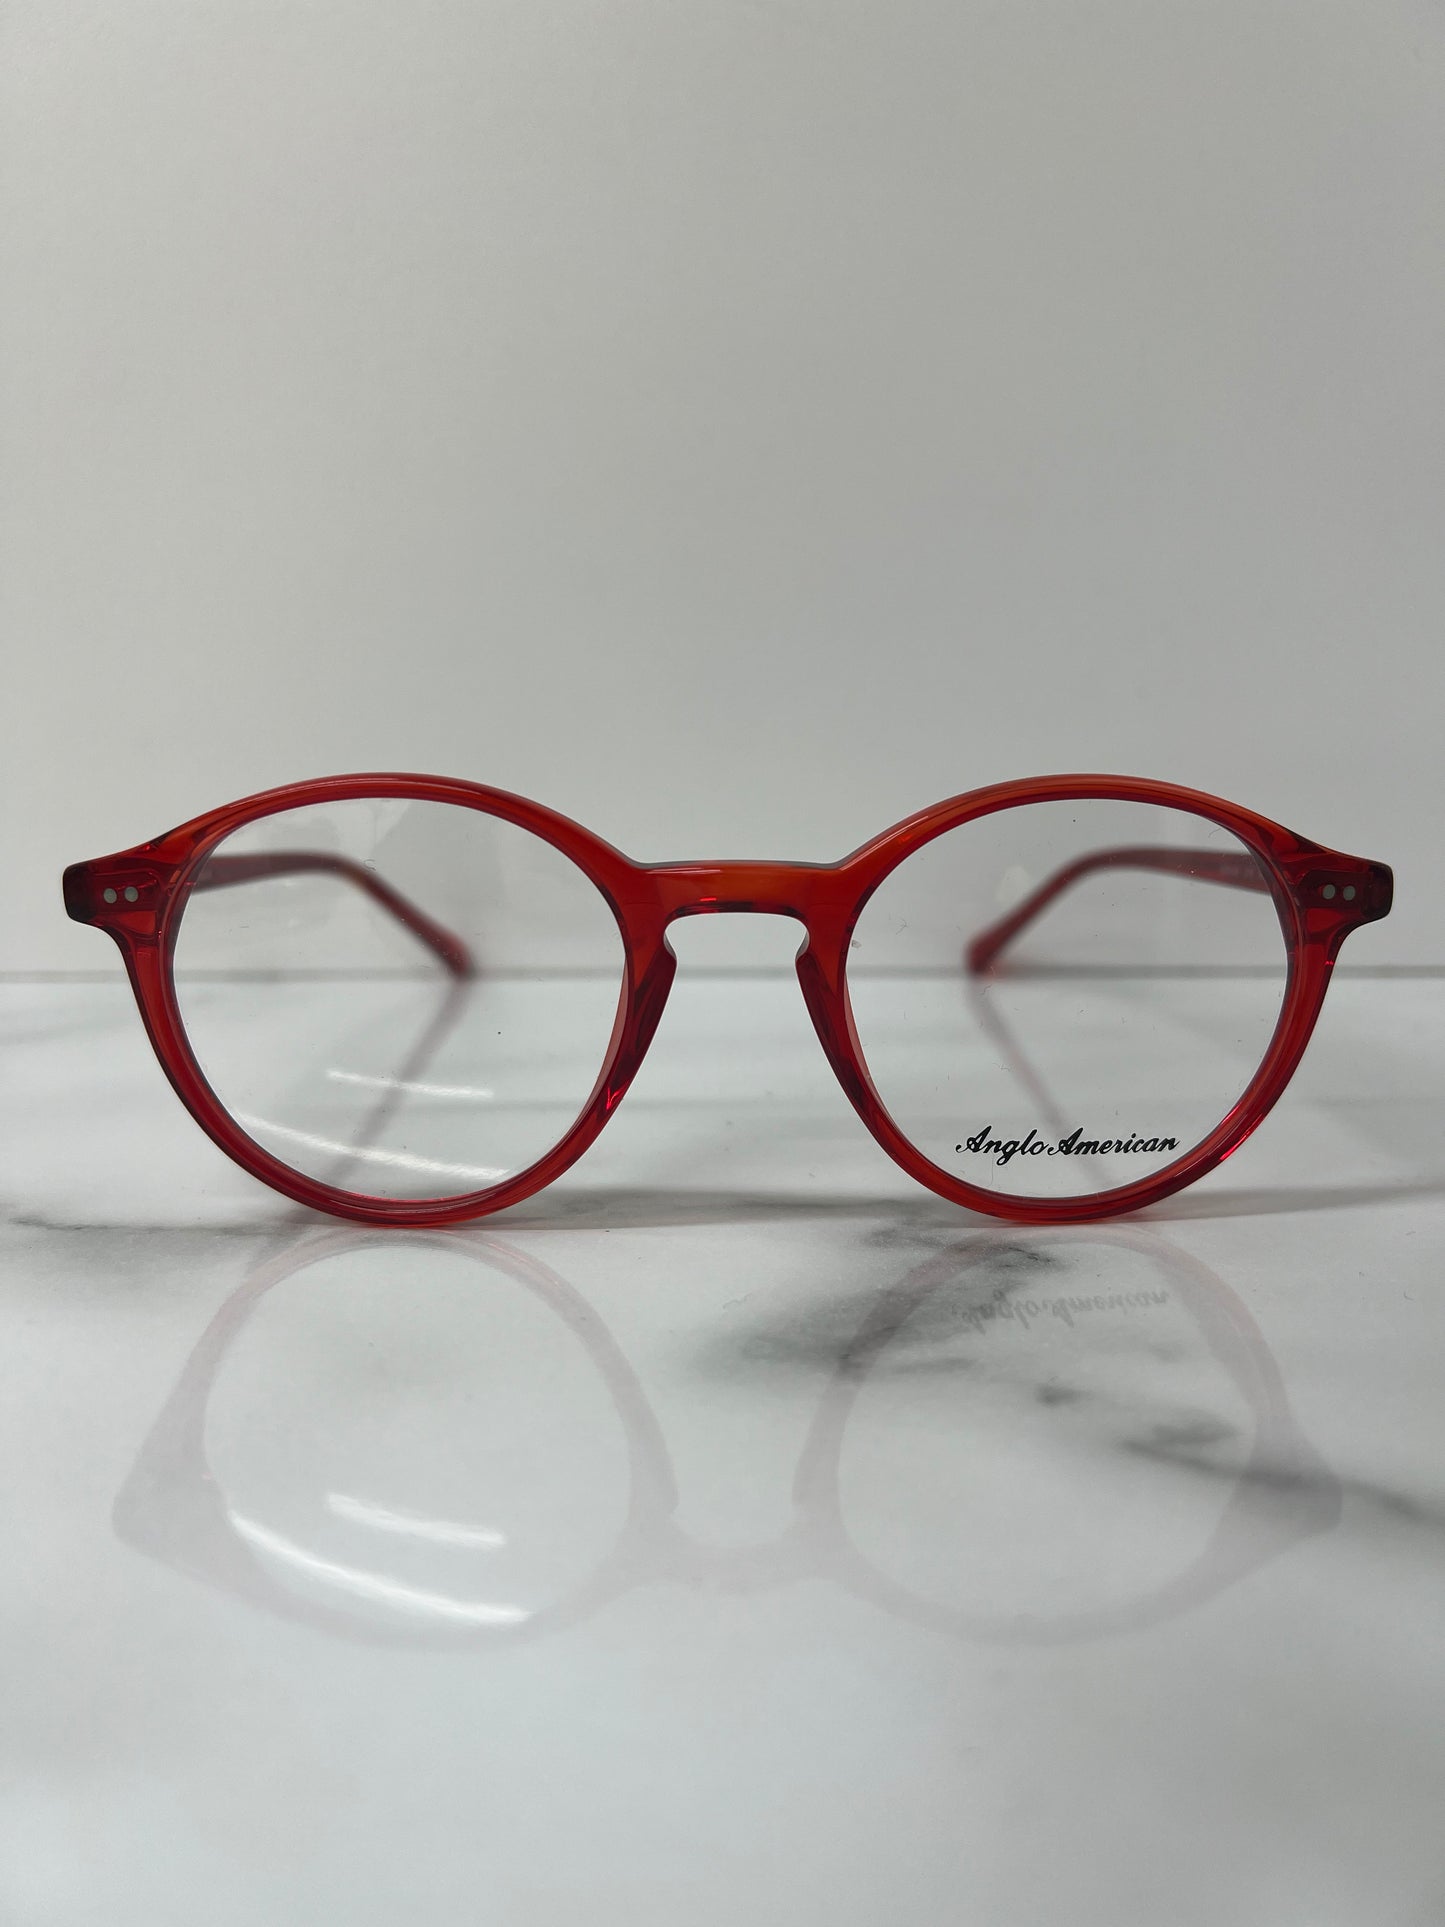 Anglo American 406 Optical Glasses Red 50mm England Designer Eyeglasses Classic